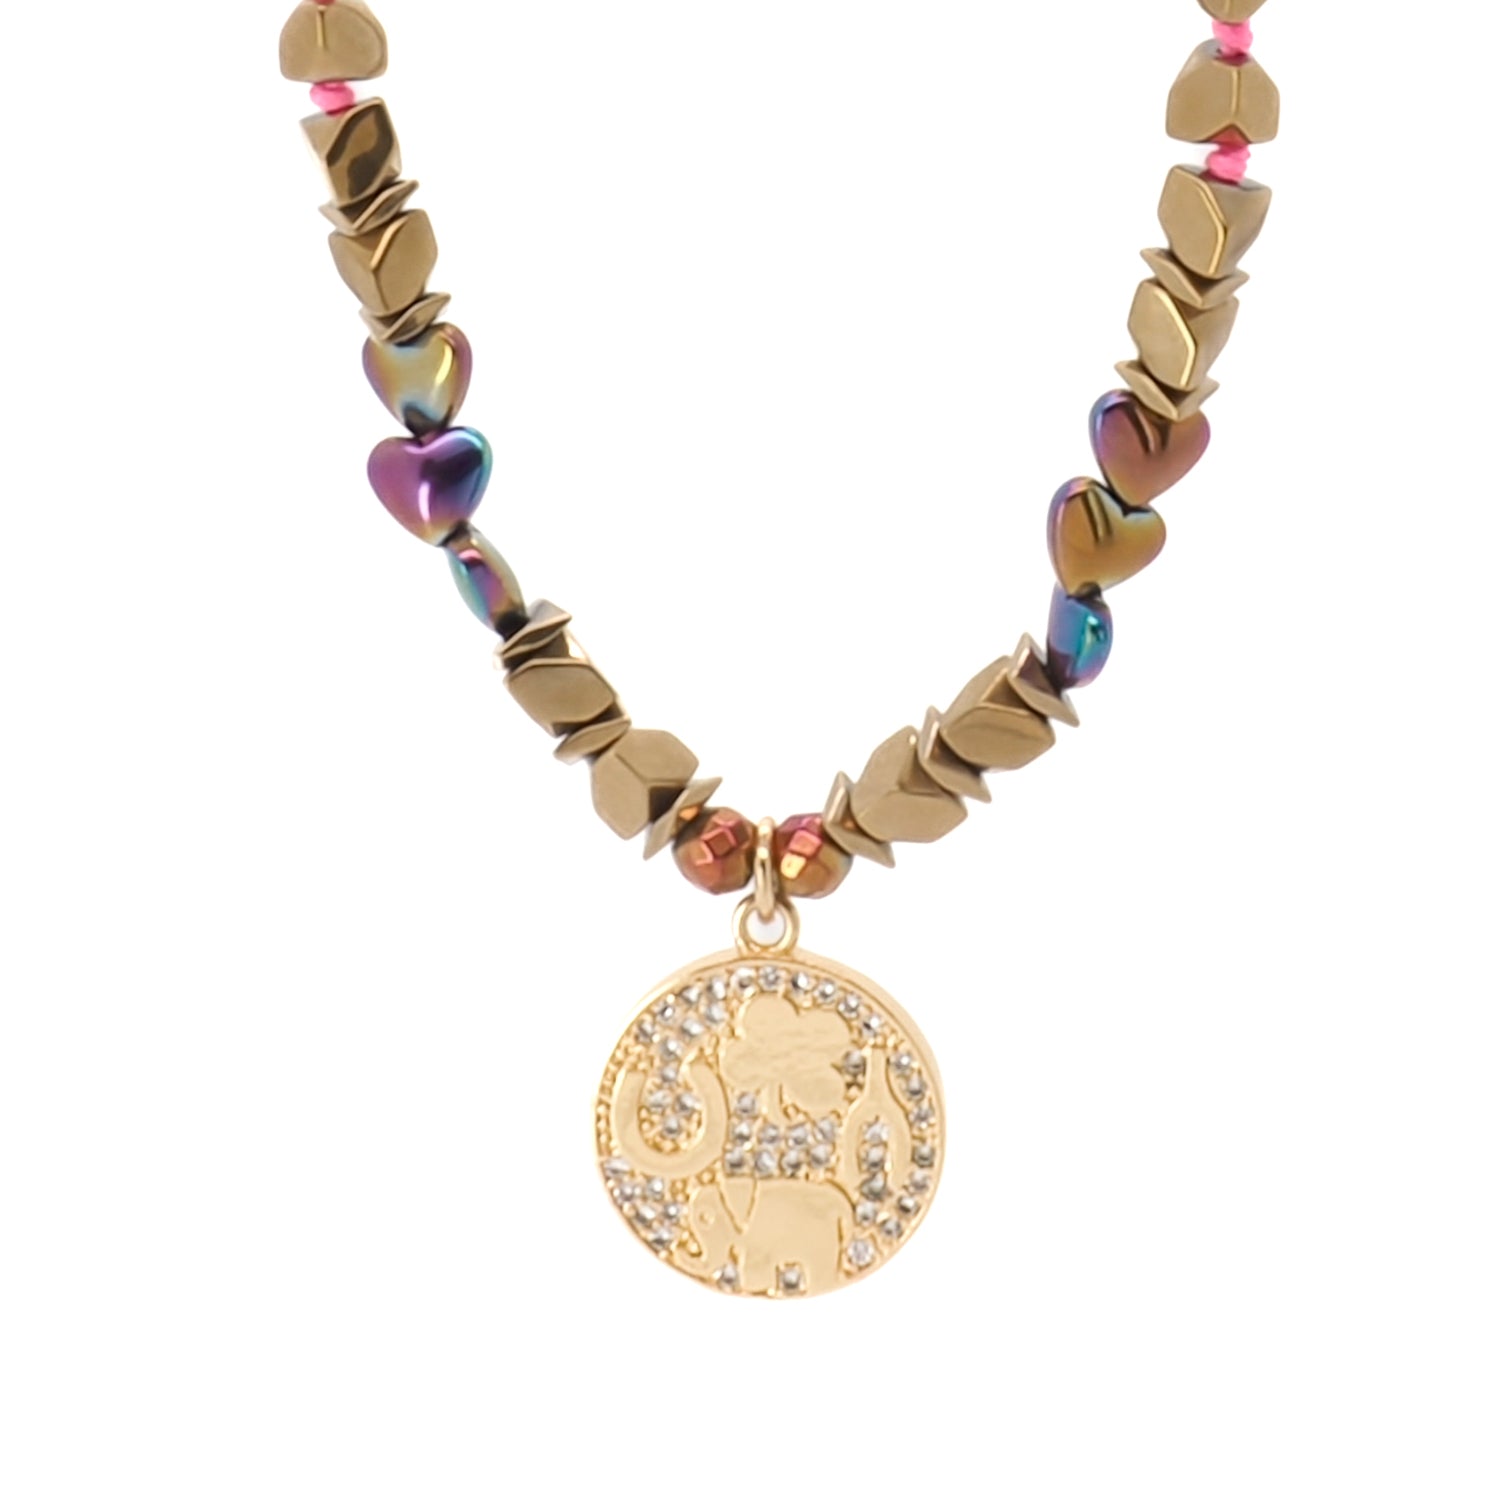 This stunning Gold Good Luck Symbol Necklace is features a unique and eye-catching design that is sure to turn heads.